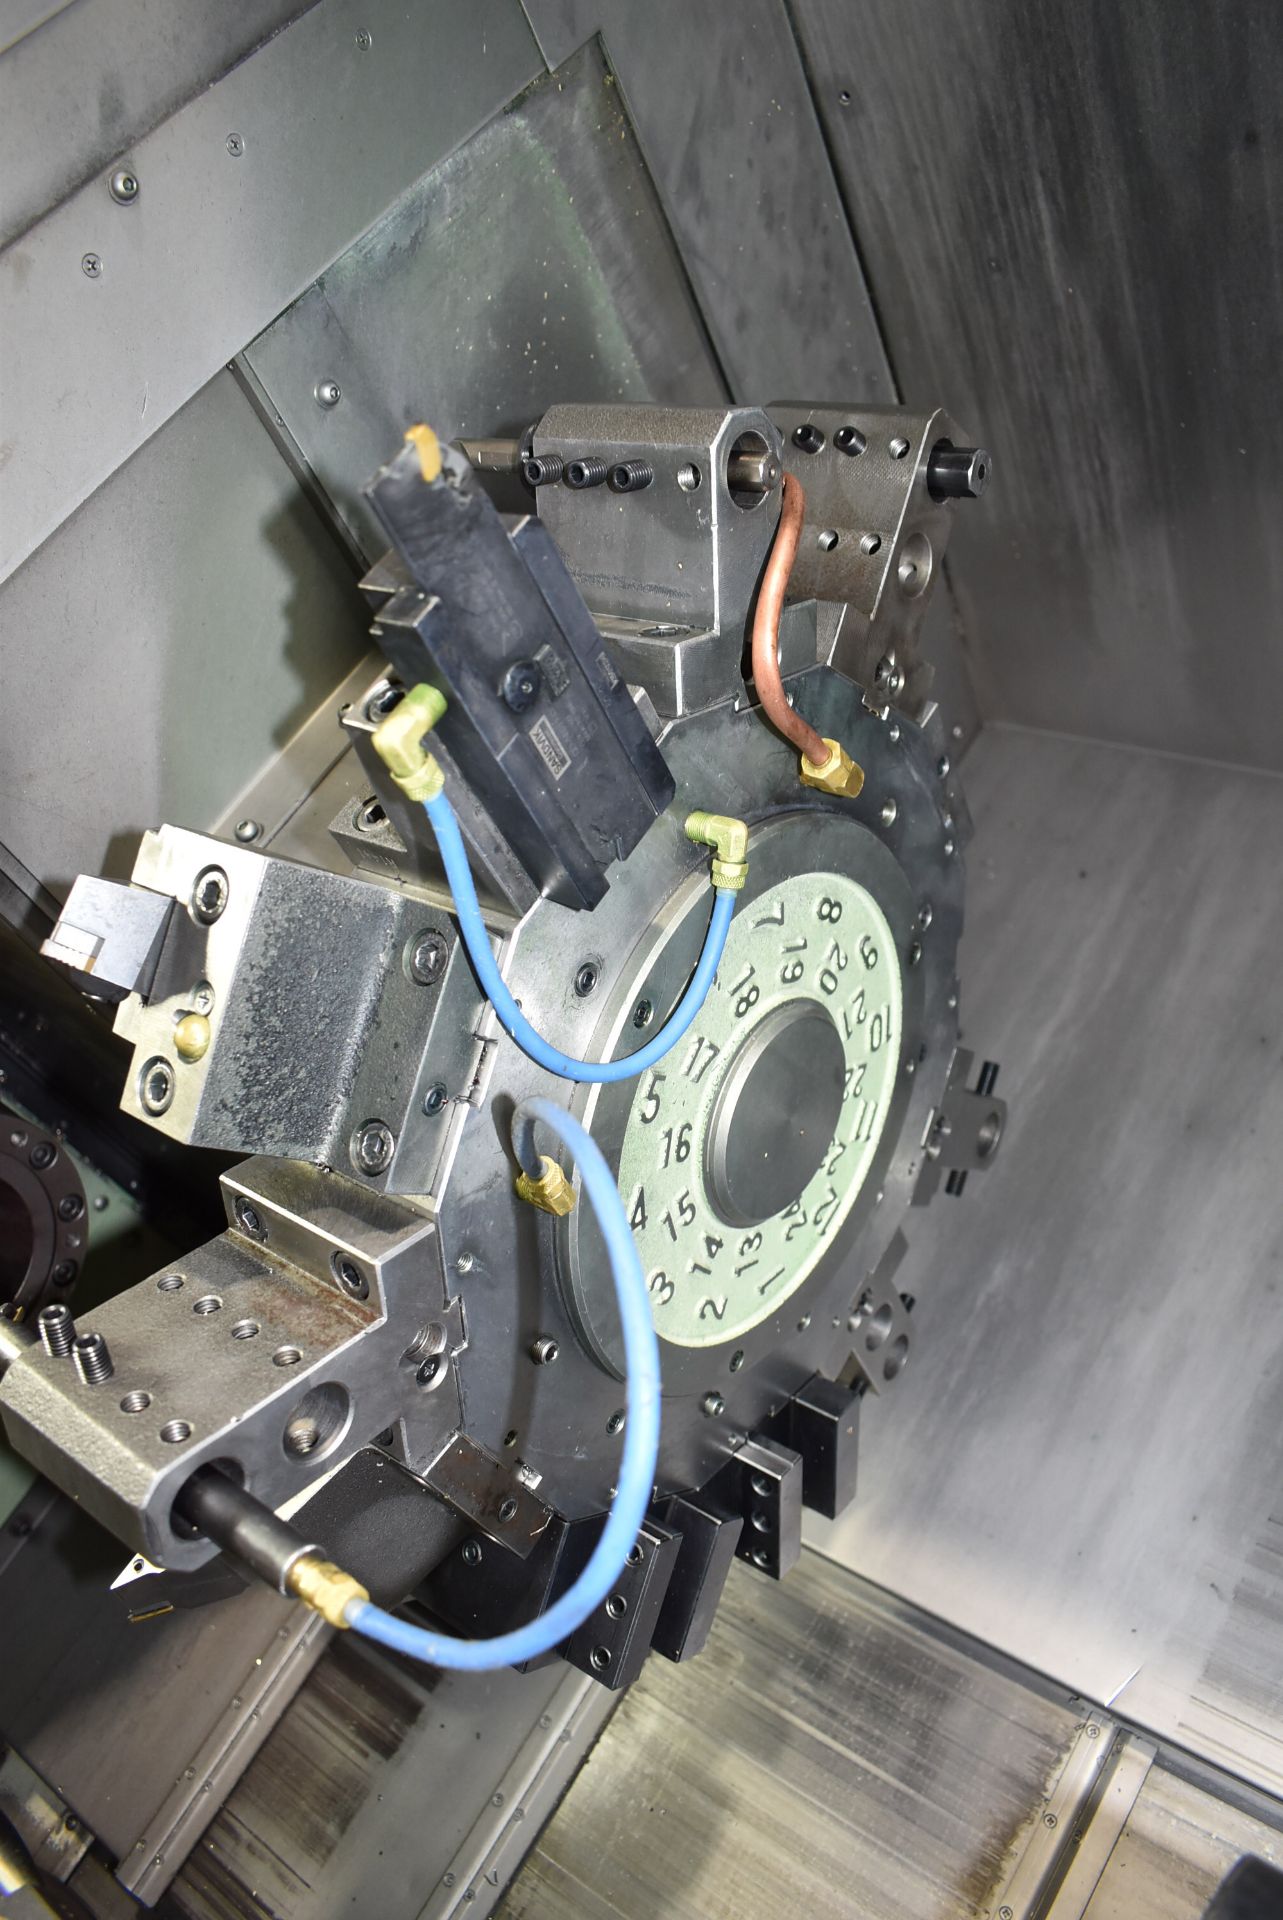 NAKAMURA-TOME (2013) WT-250 II S MULTI-AXIS OPPOSED SPINDLE AND TWIN TURRET CNC MULTI-TASKING CENTER - Image 3 of 15